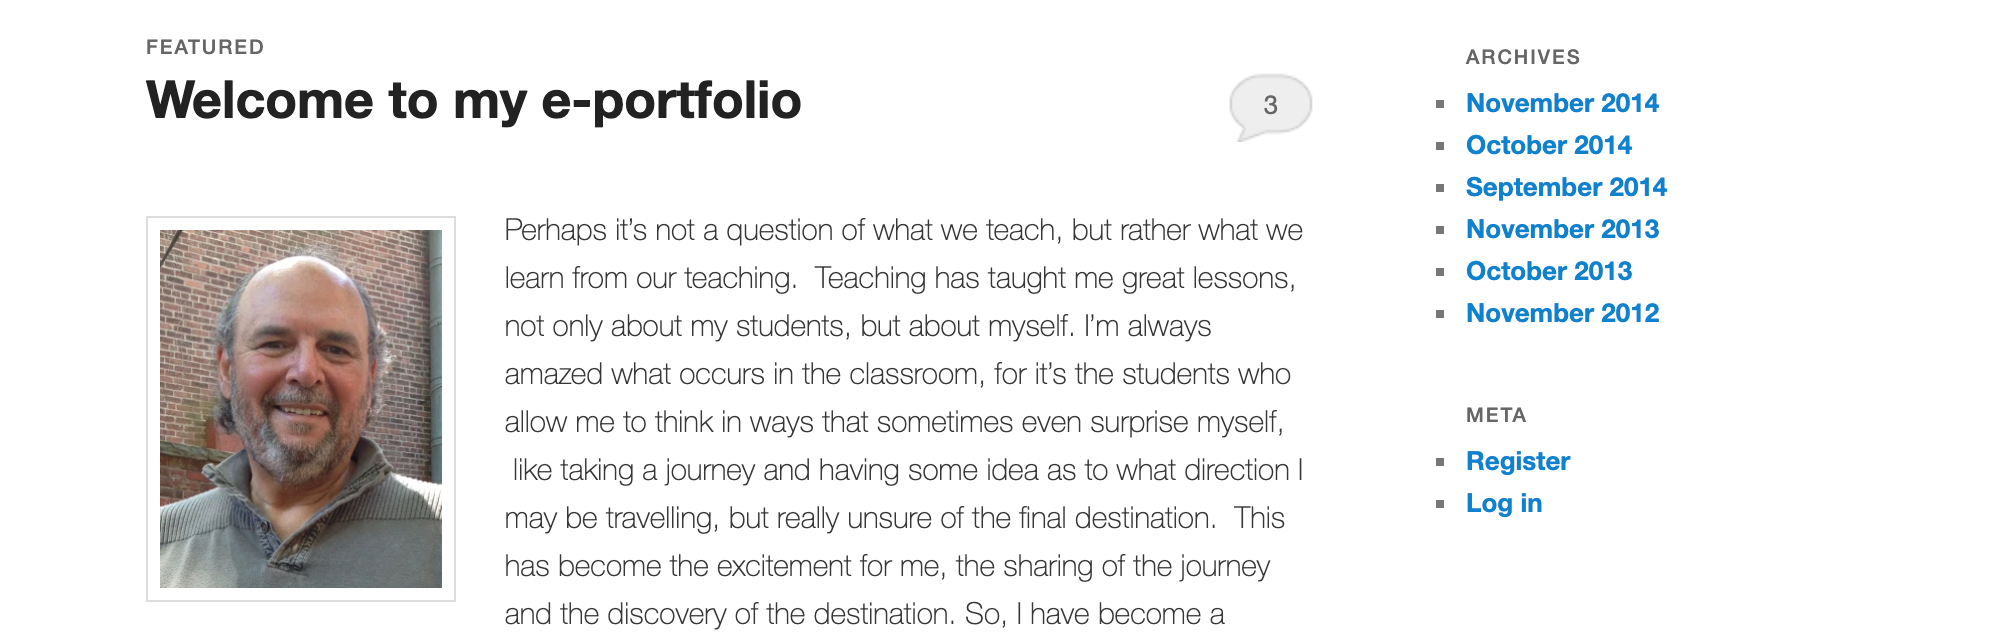 the home page for Sal Buffo. His portfolio has multiple elements including links to writing, classes taught, and refections on his teaching. 